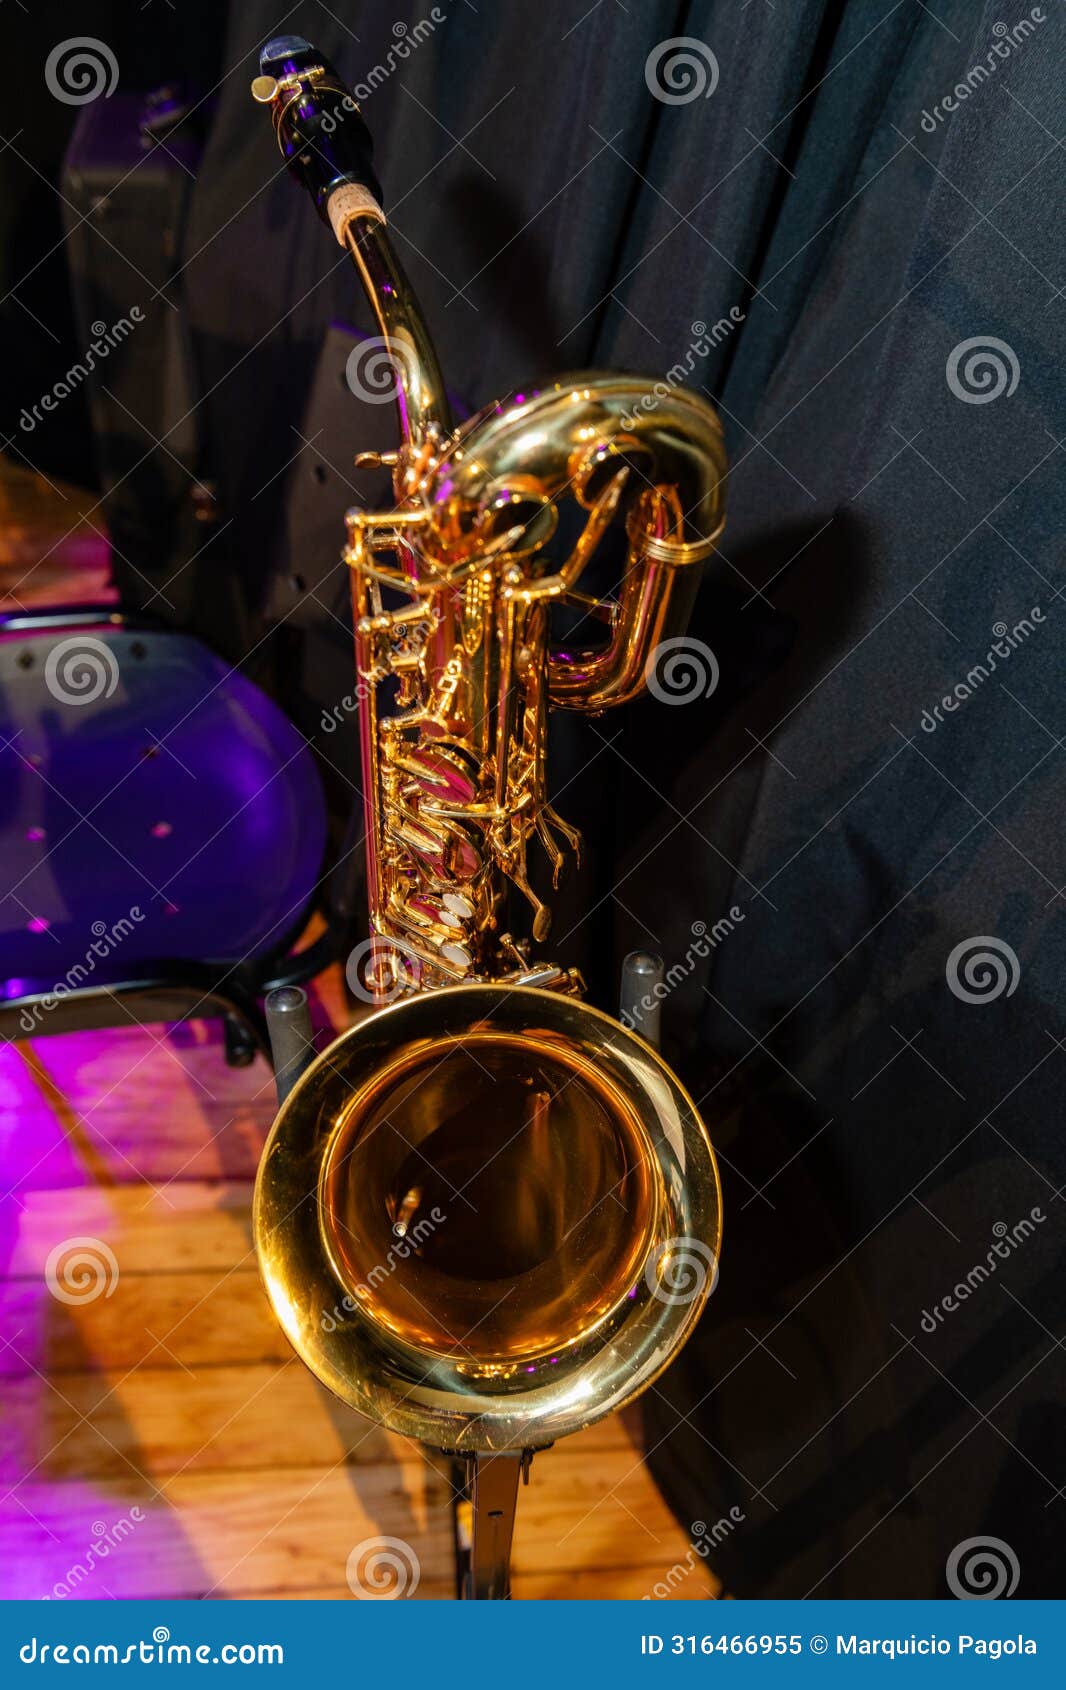 a gold colored saxophone is on display